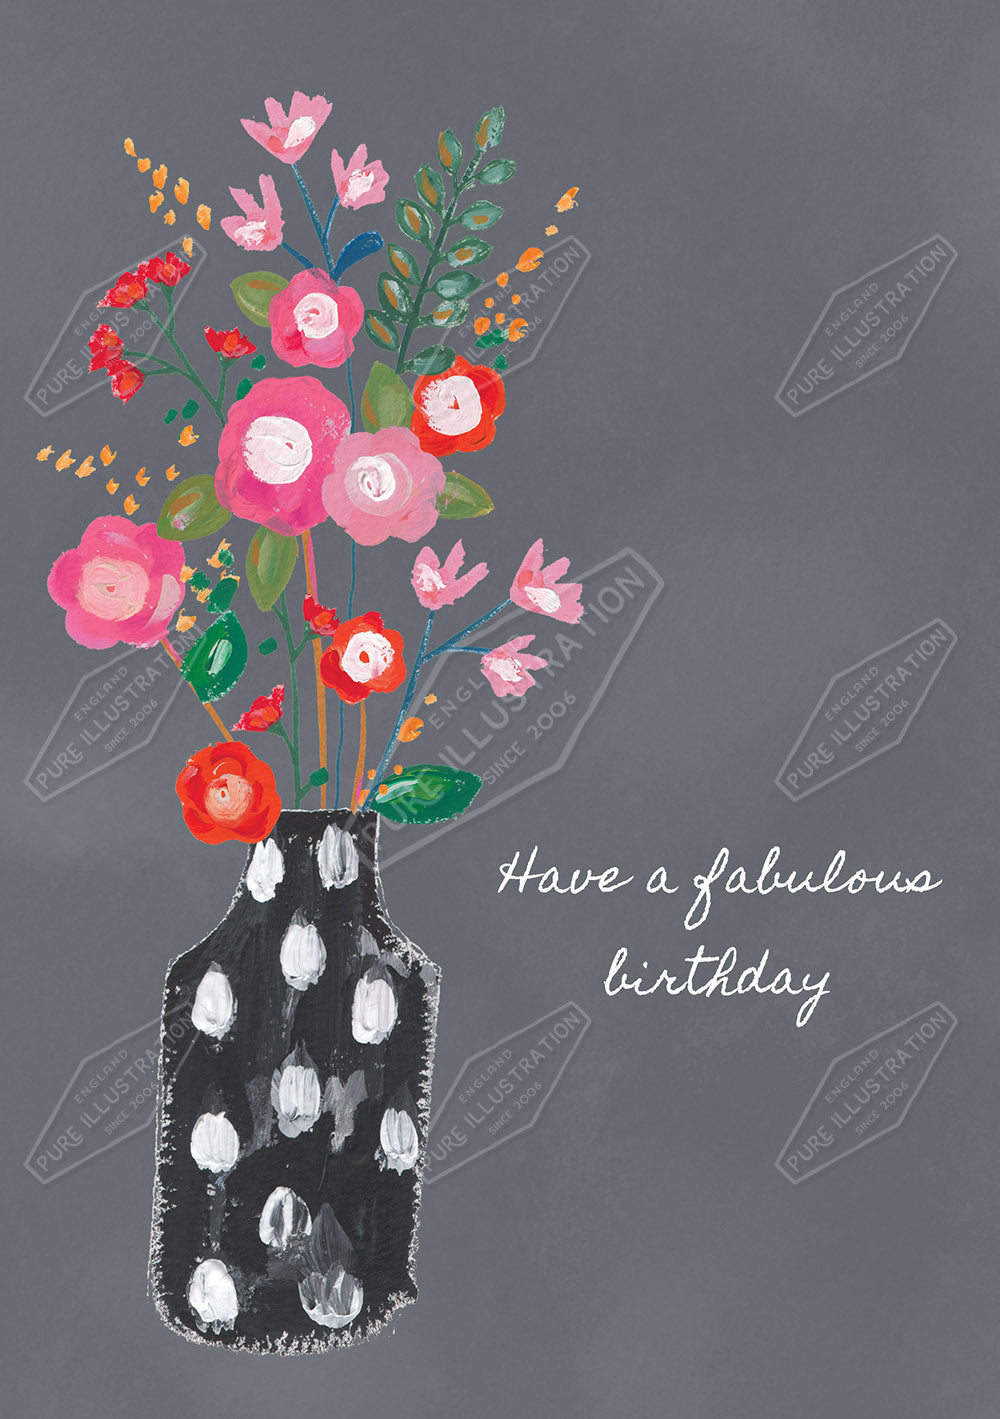 00033187KSP- Kerry Spurling is represented by Pure Art Licensing Agency - Birthday Greeting Card Design